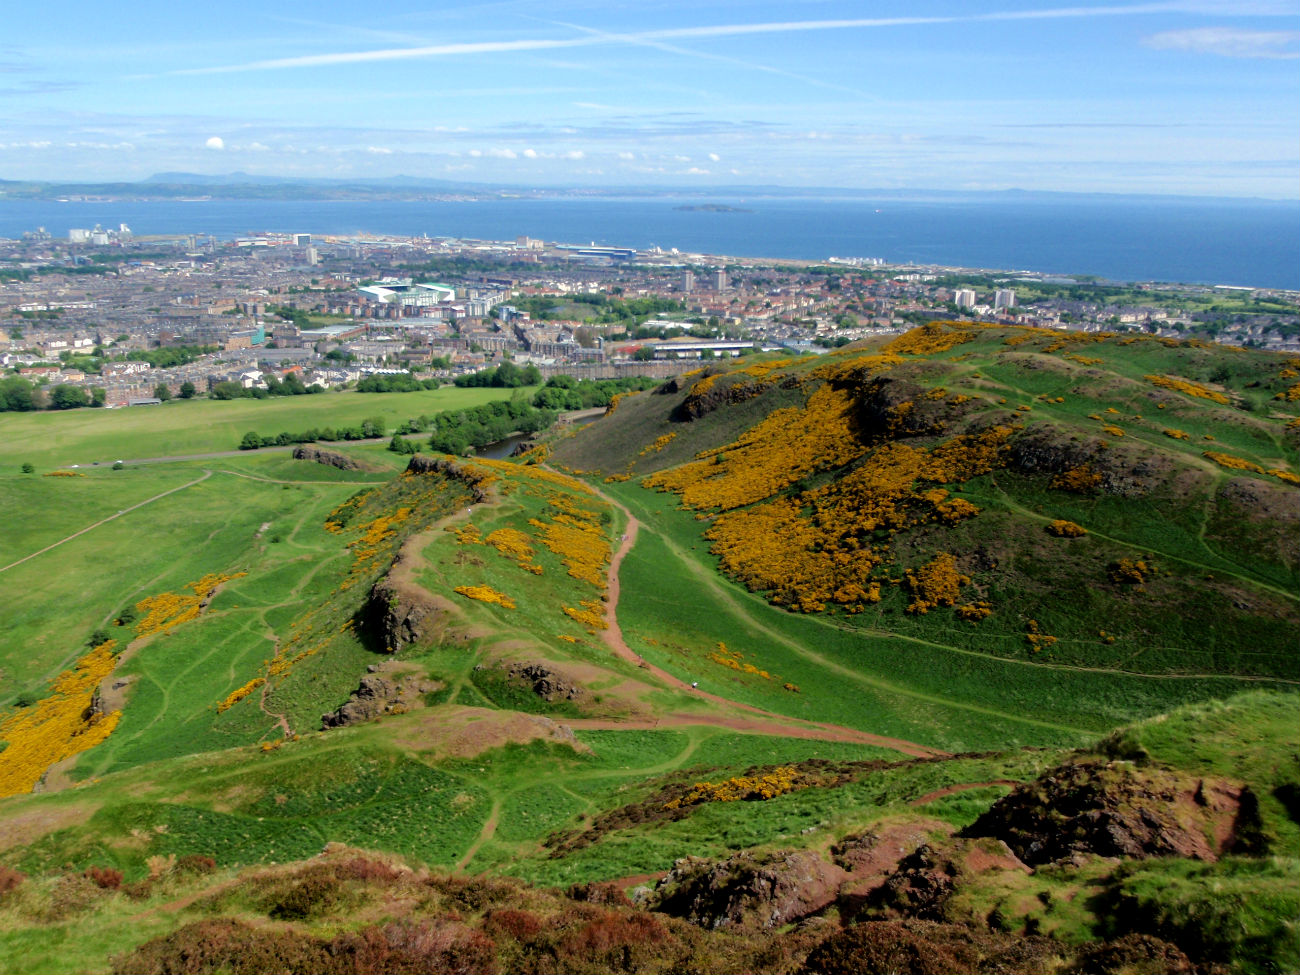 Arthur's Seat from the top. This is the angle that doesn't show all of the tourists around us.